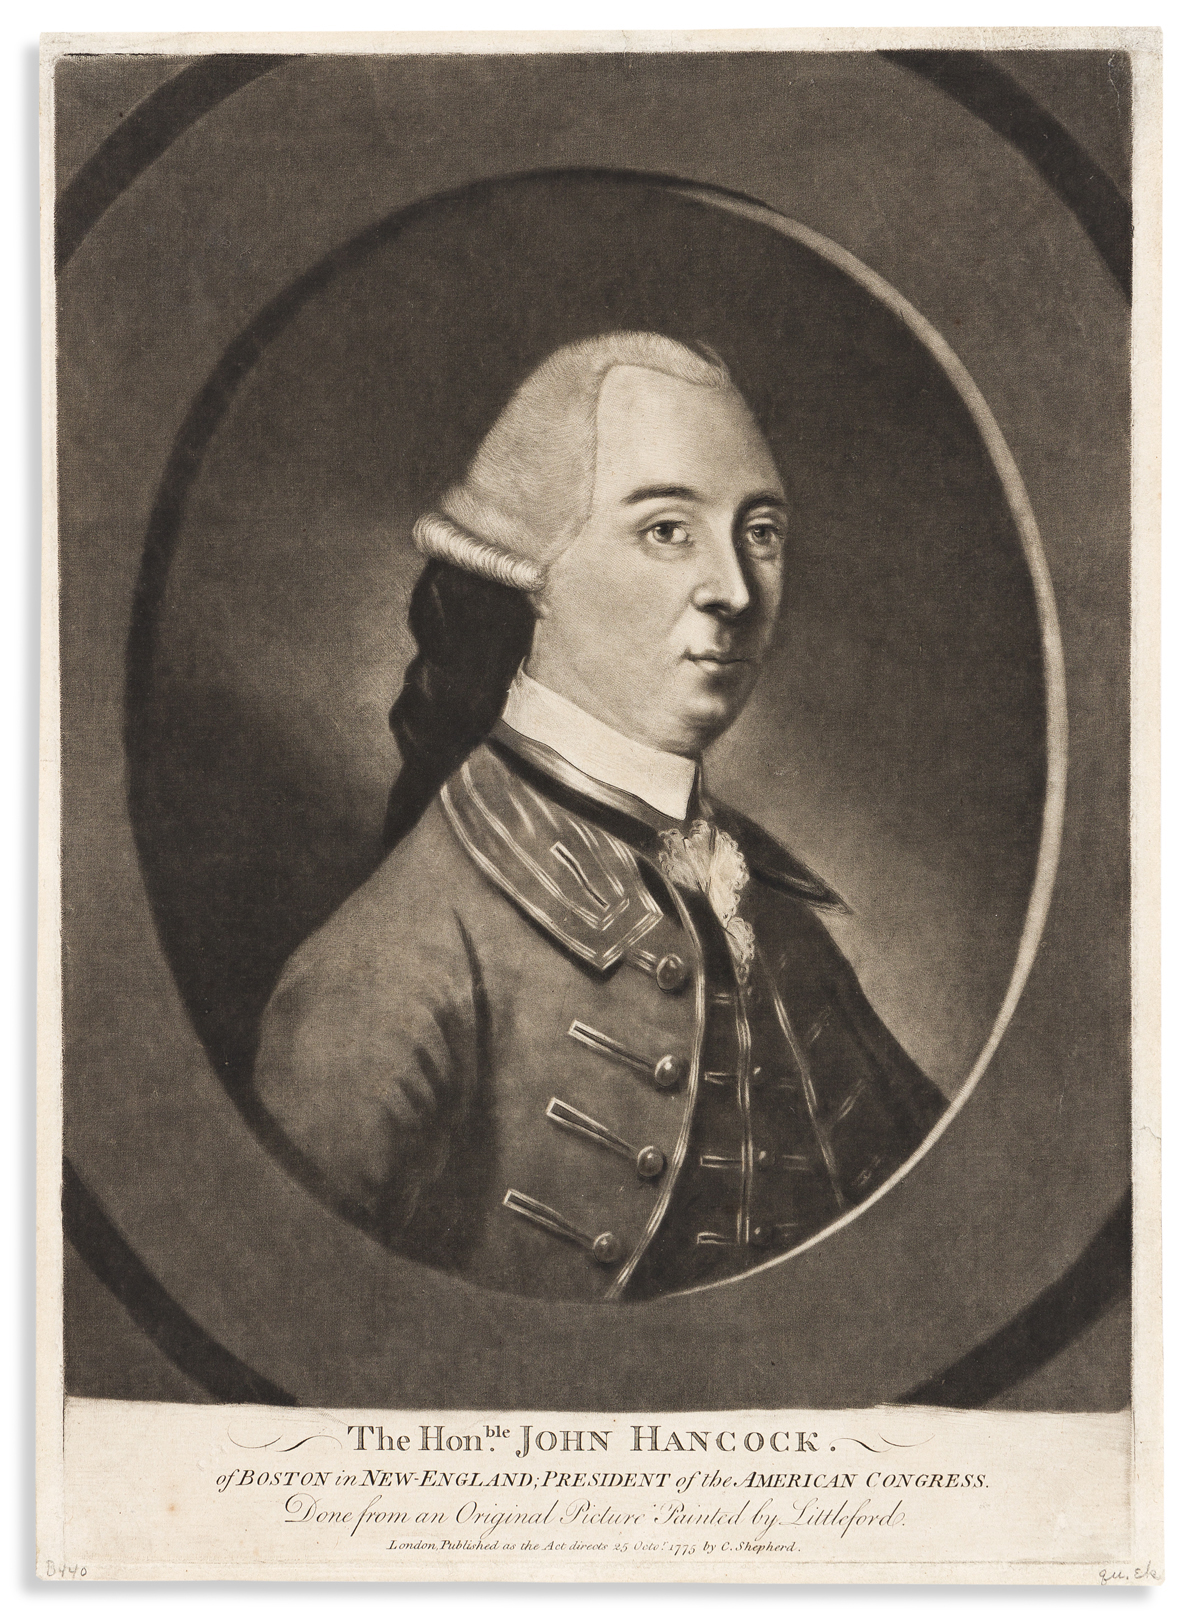 (FOUNDING FATHERS.) The Honble John Hancock of Boston in New England, President of the American Congress.